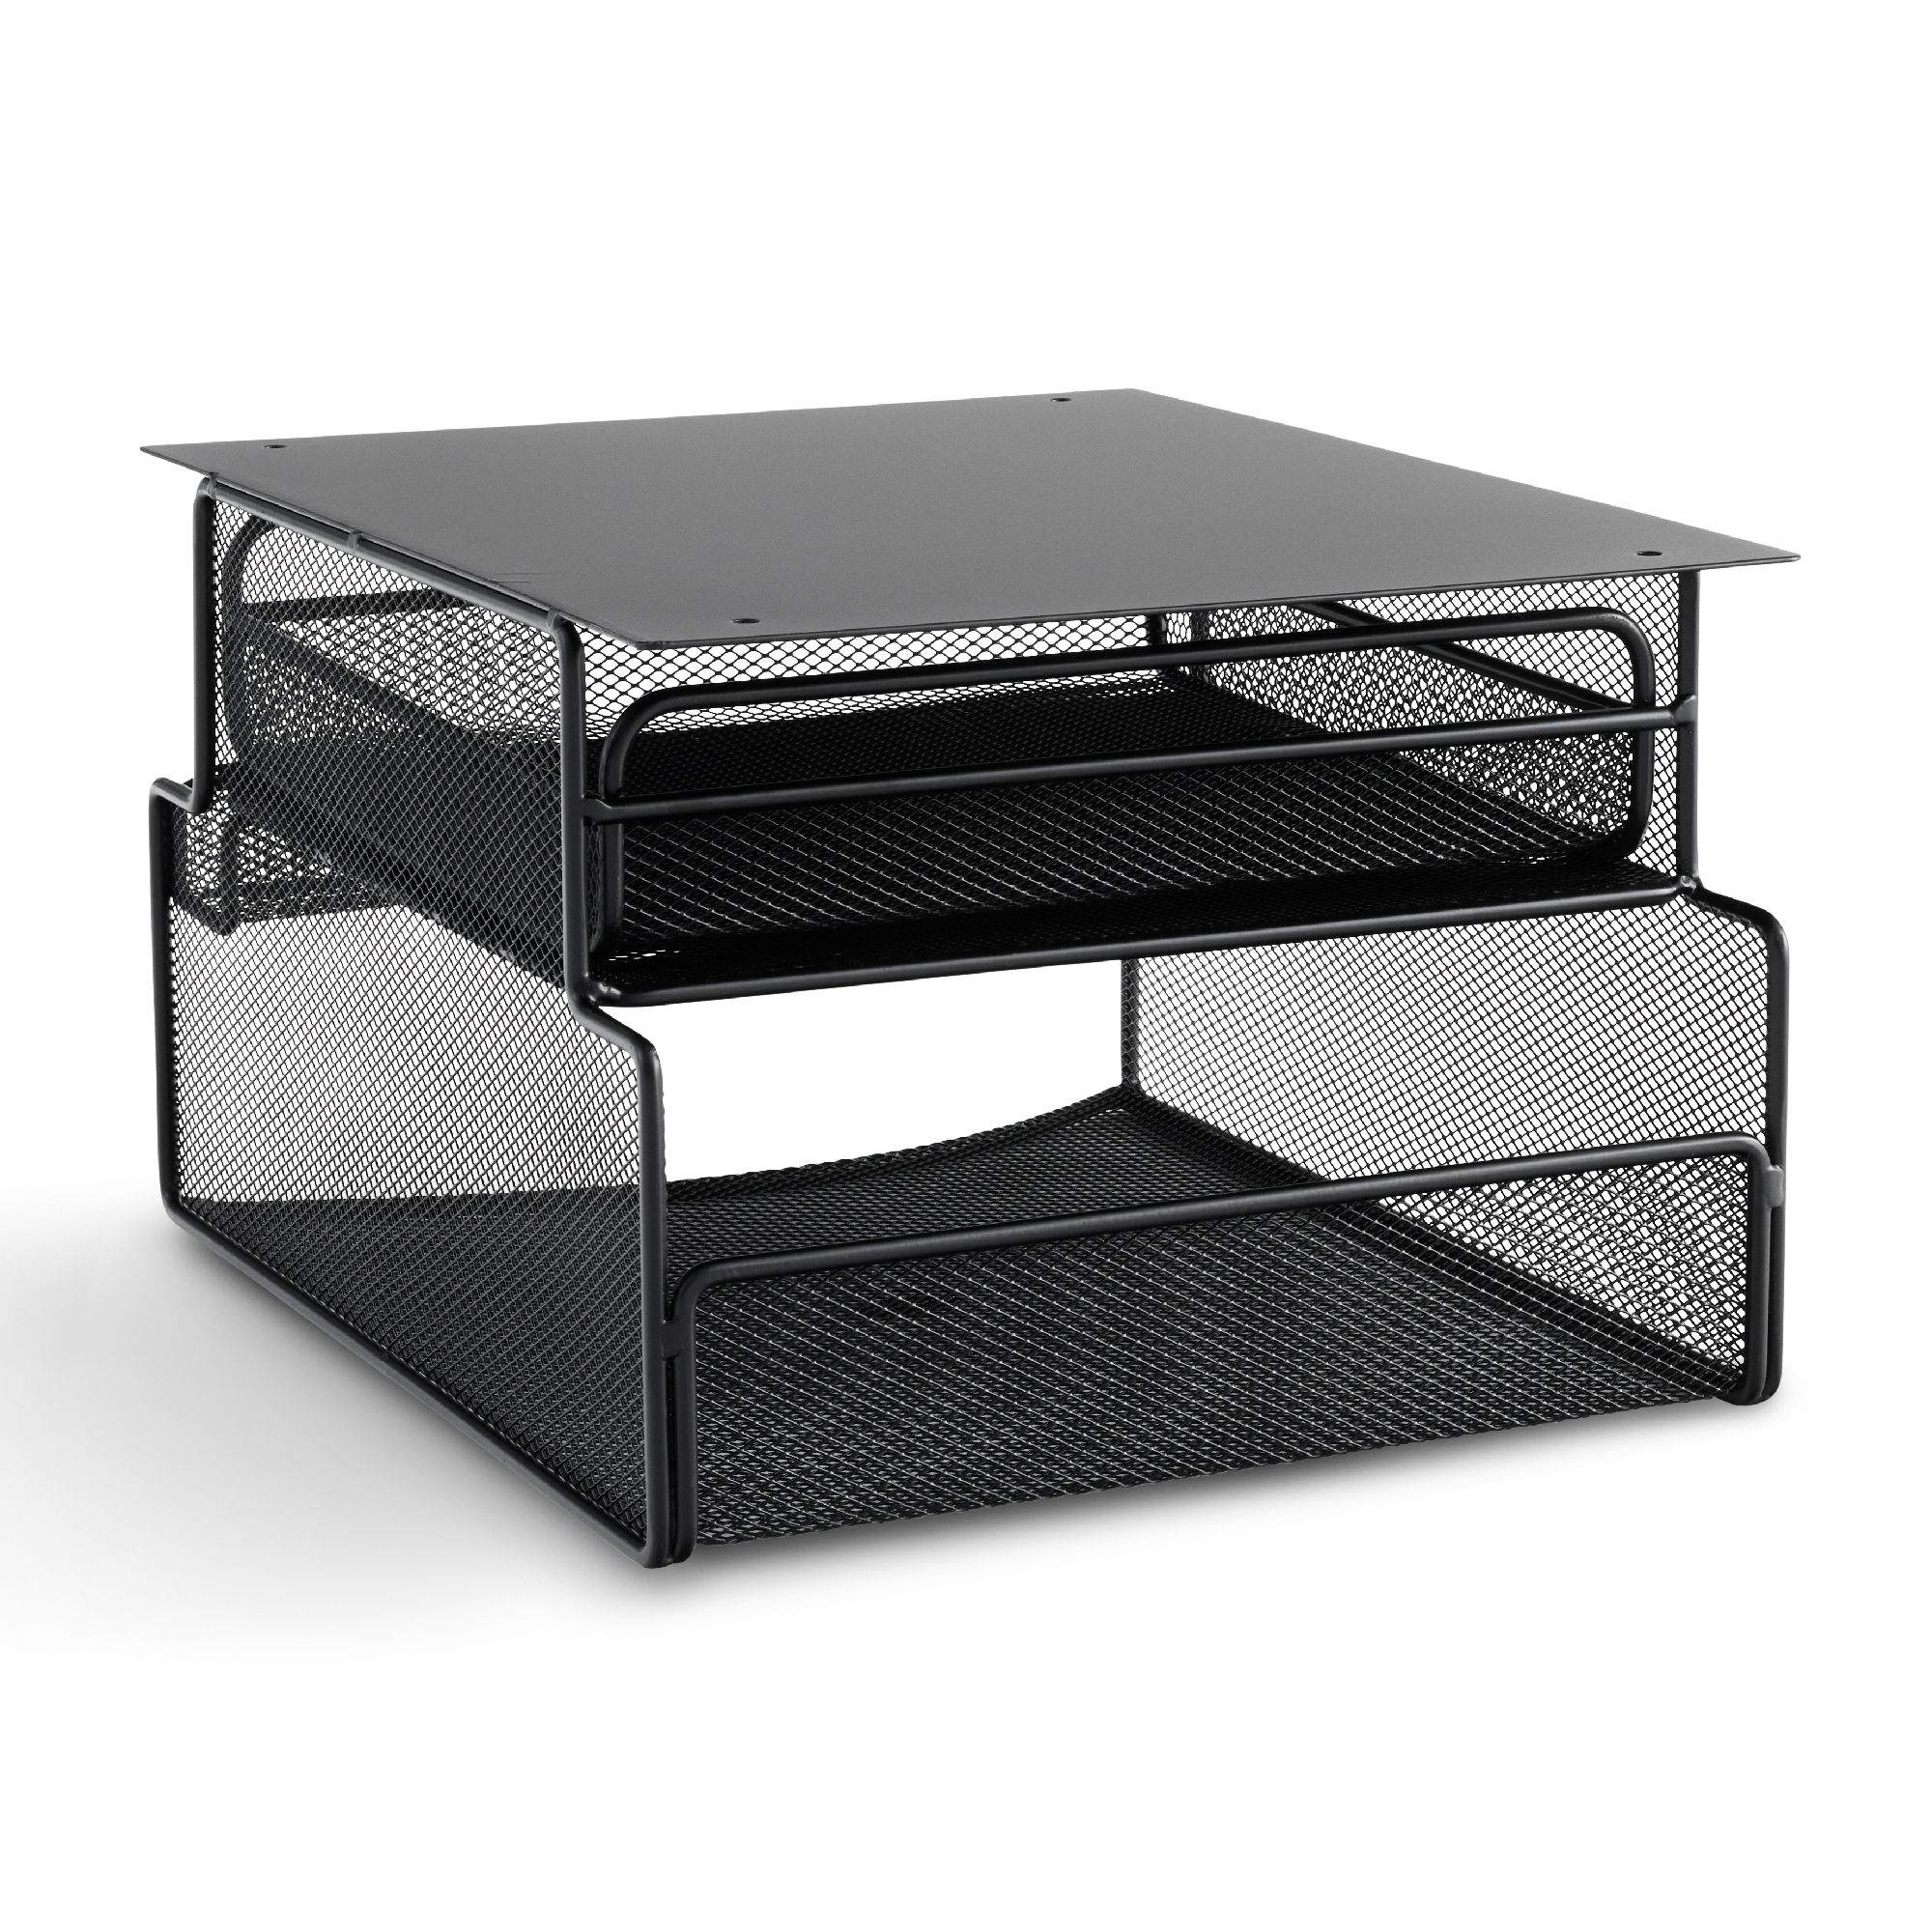 Safco, Onyx Hanging Desktop Organizer with 5 Horizontal Trays, Under-Desk  Storage. Fits Tables 1.75 Thick and Under